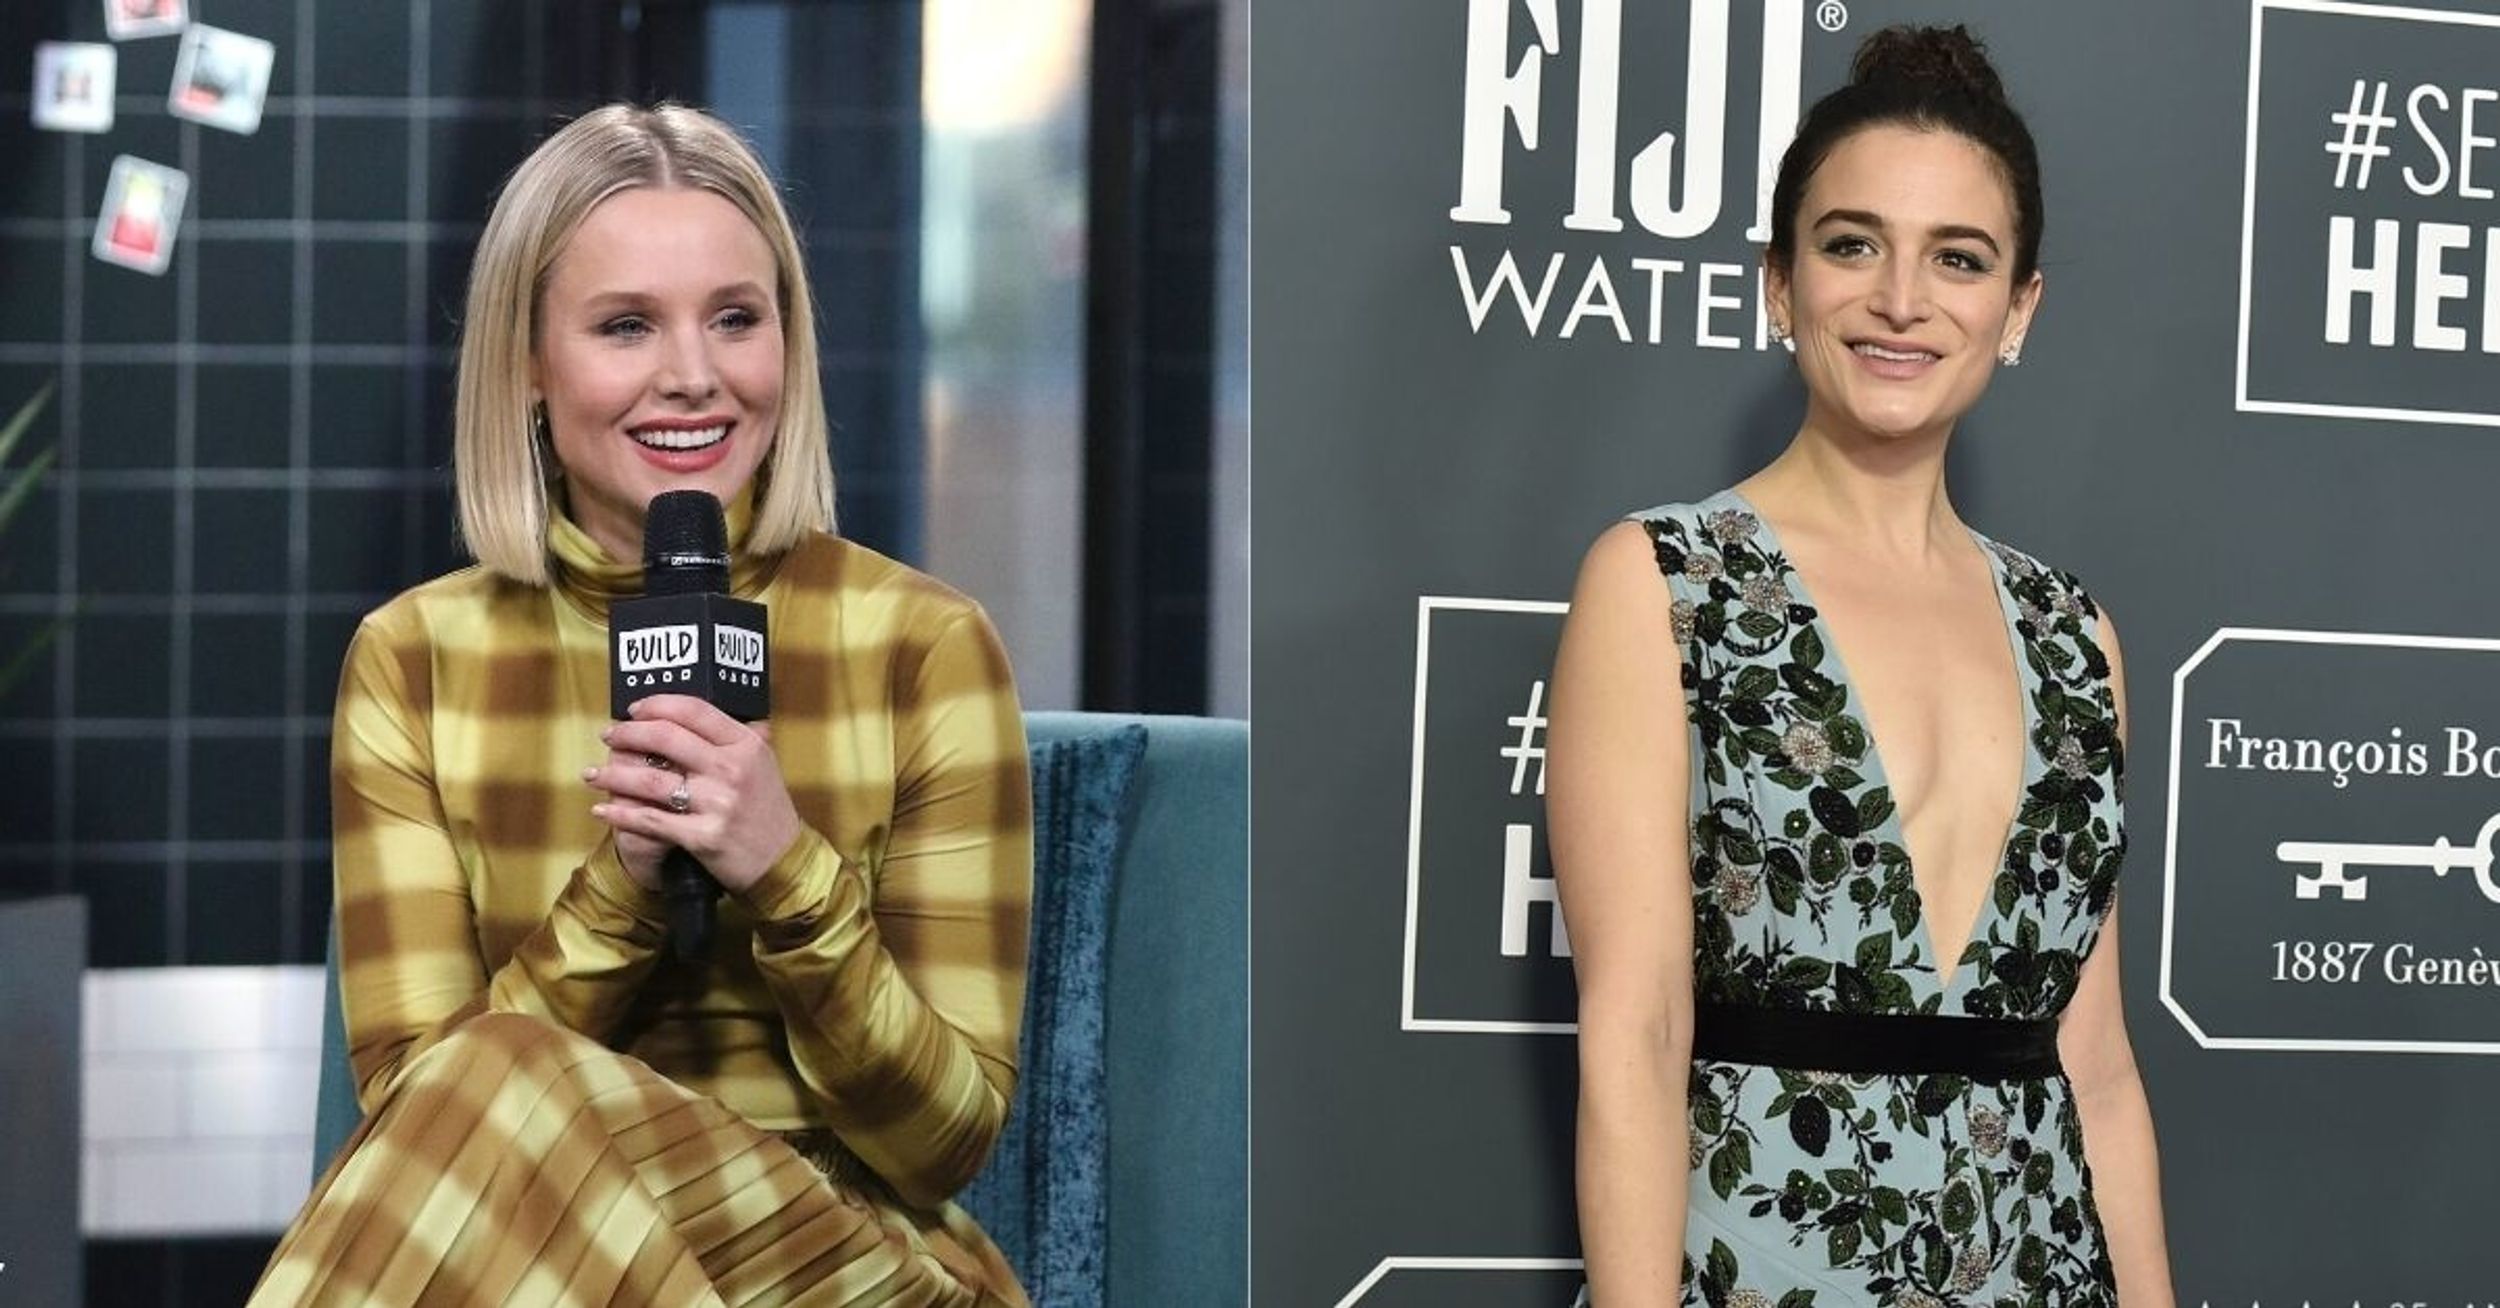 Kristen Bell And Jenny Slate Explain Why They Will No Longer Voice Their Mixed-Race Characters On 'Central Park' And 'Big Mouth'